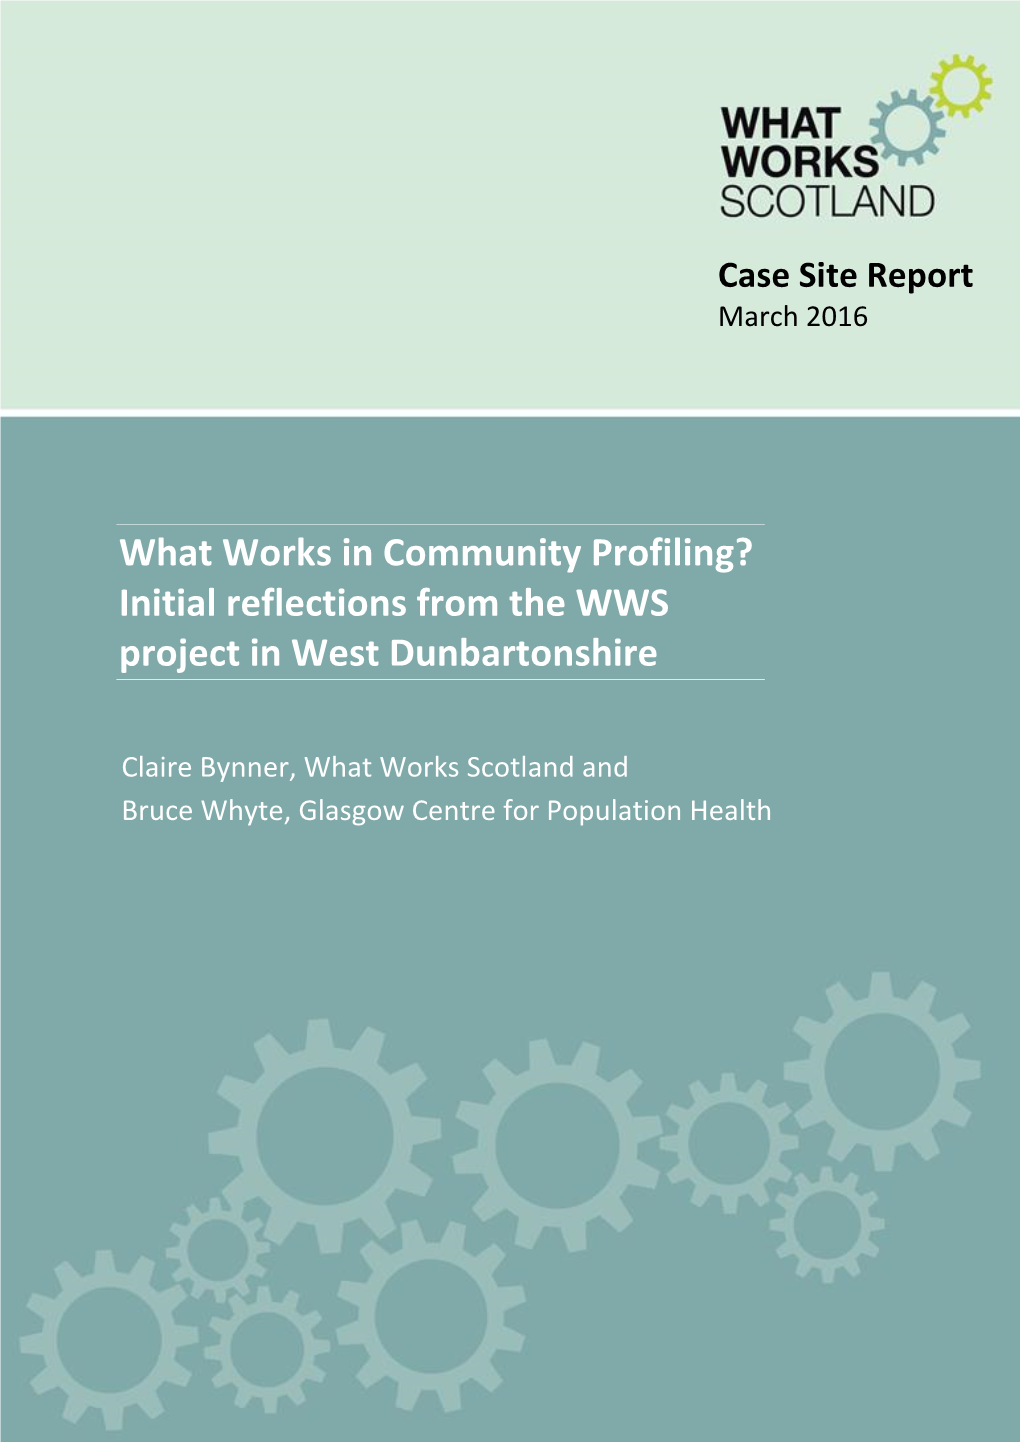 What Works in Community Profiling? Initial Reflections from the WWS Project in West Dunbartonshire